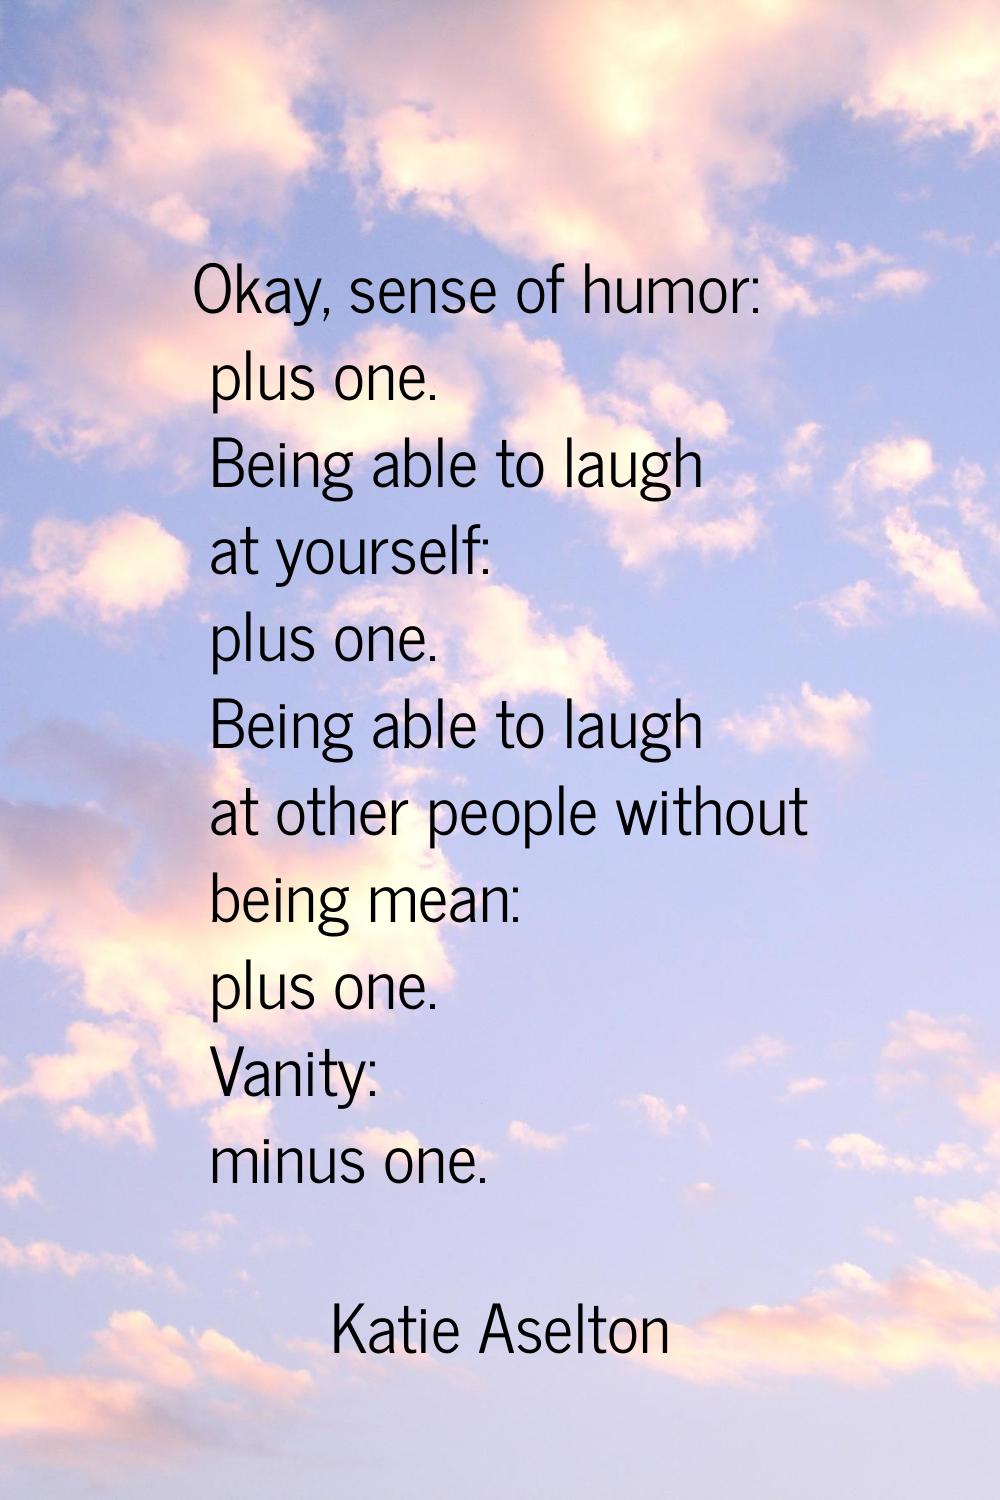 Okay, sense of humor: plus one. Being able to laugh at yourself: plus one. Being able to laugh at o